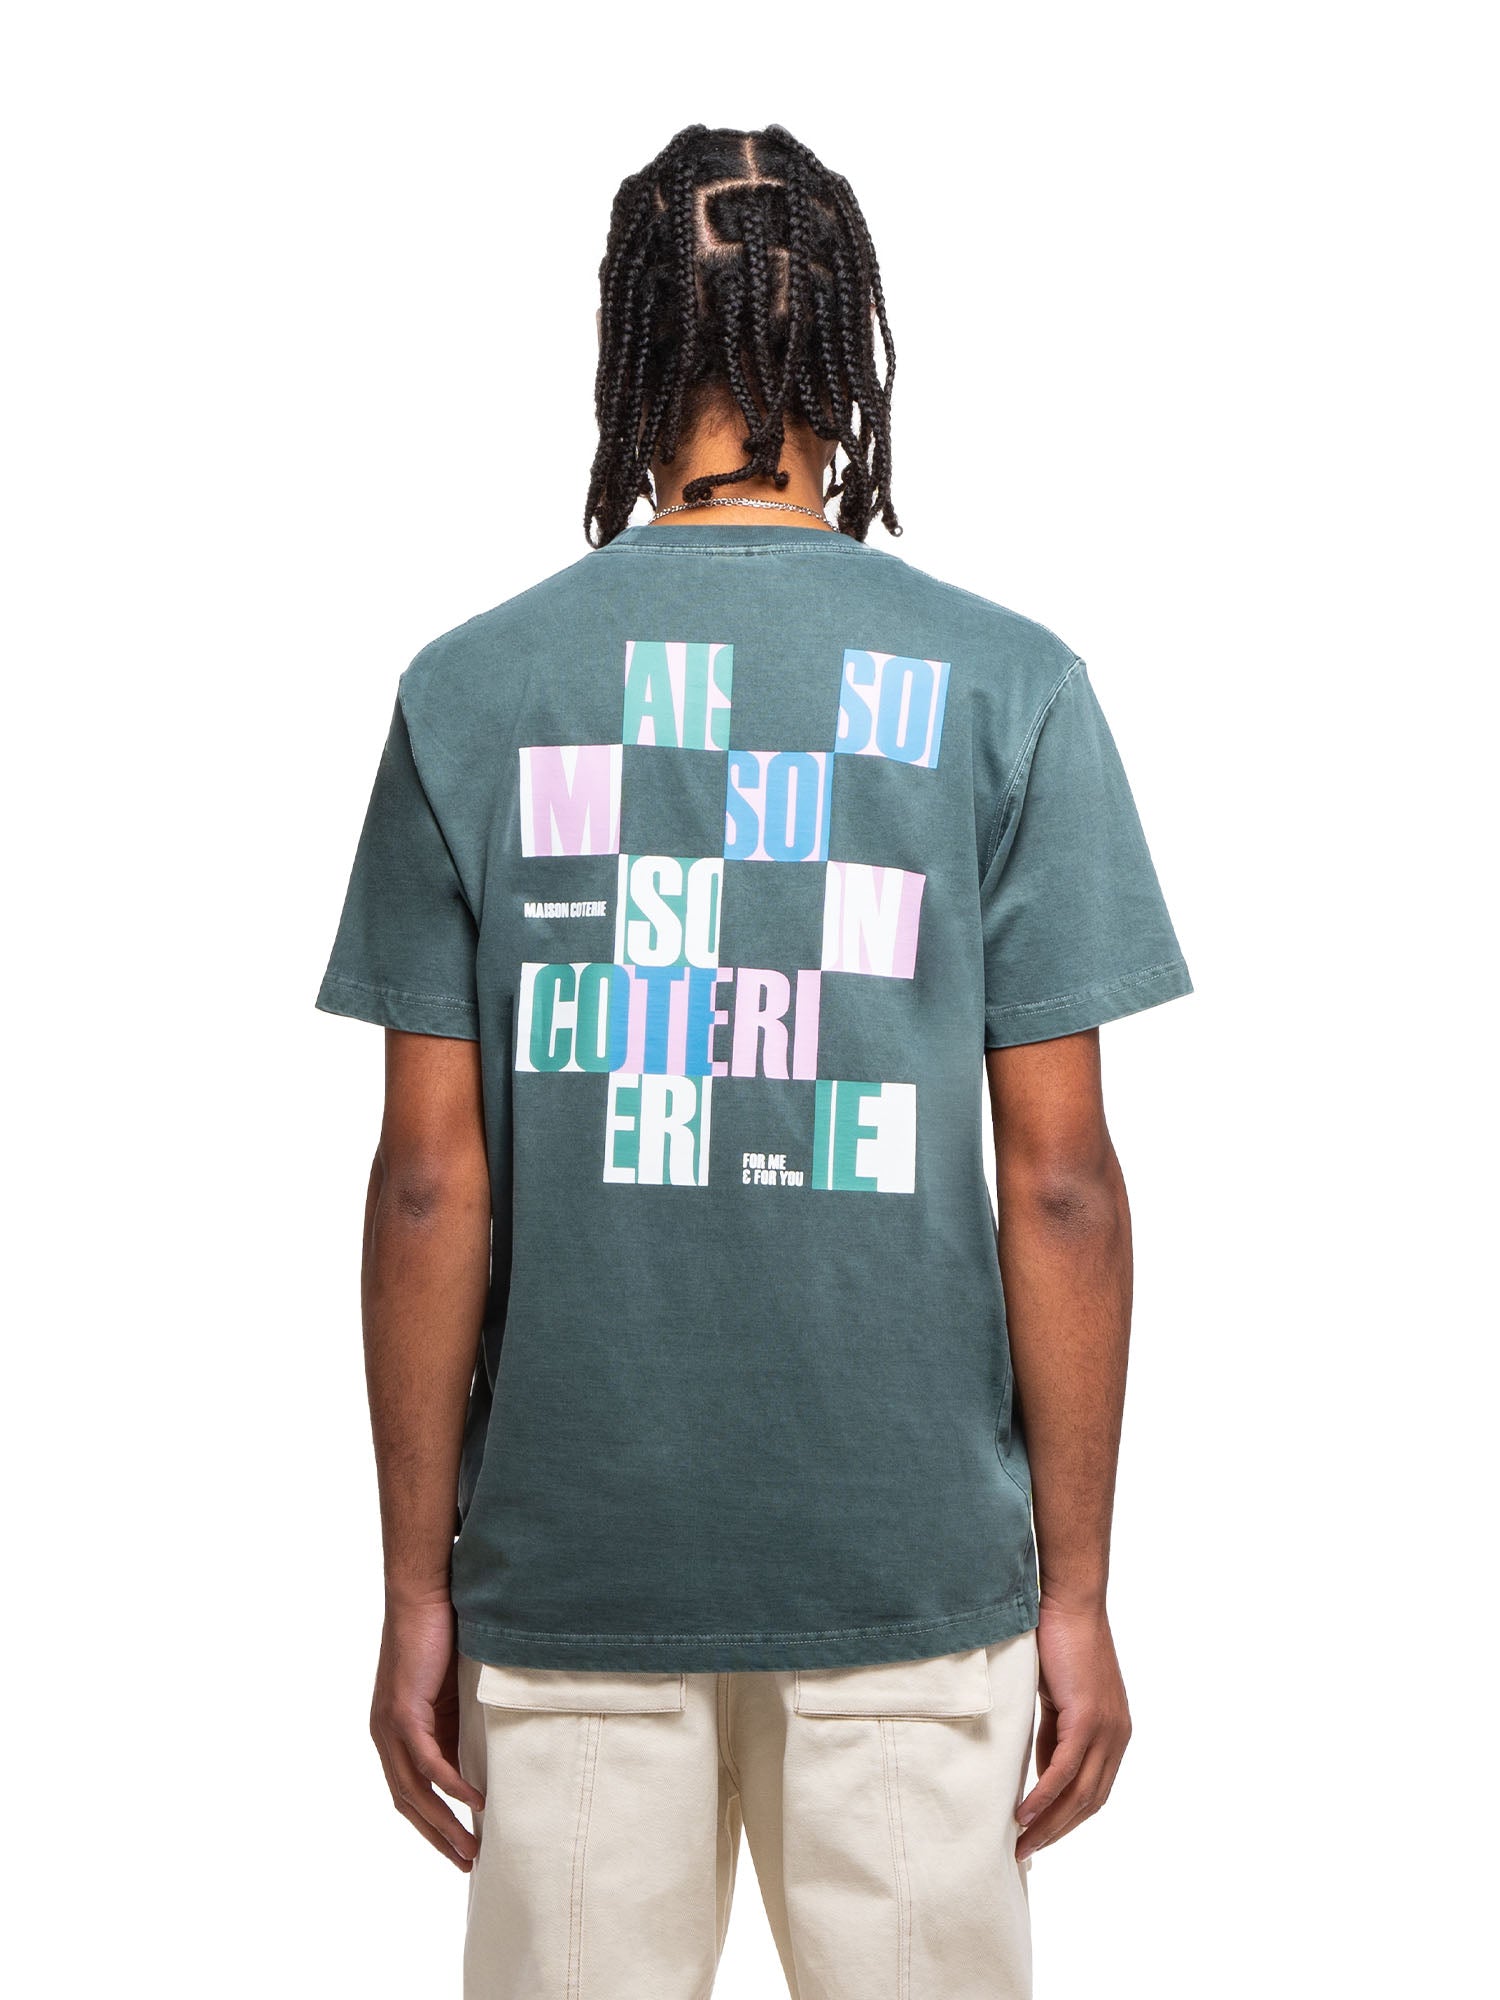 Avery - Pigment Dye T-Shirt - Forest Green